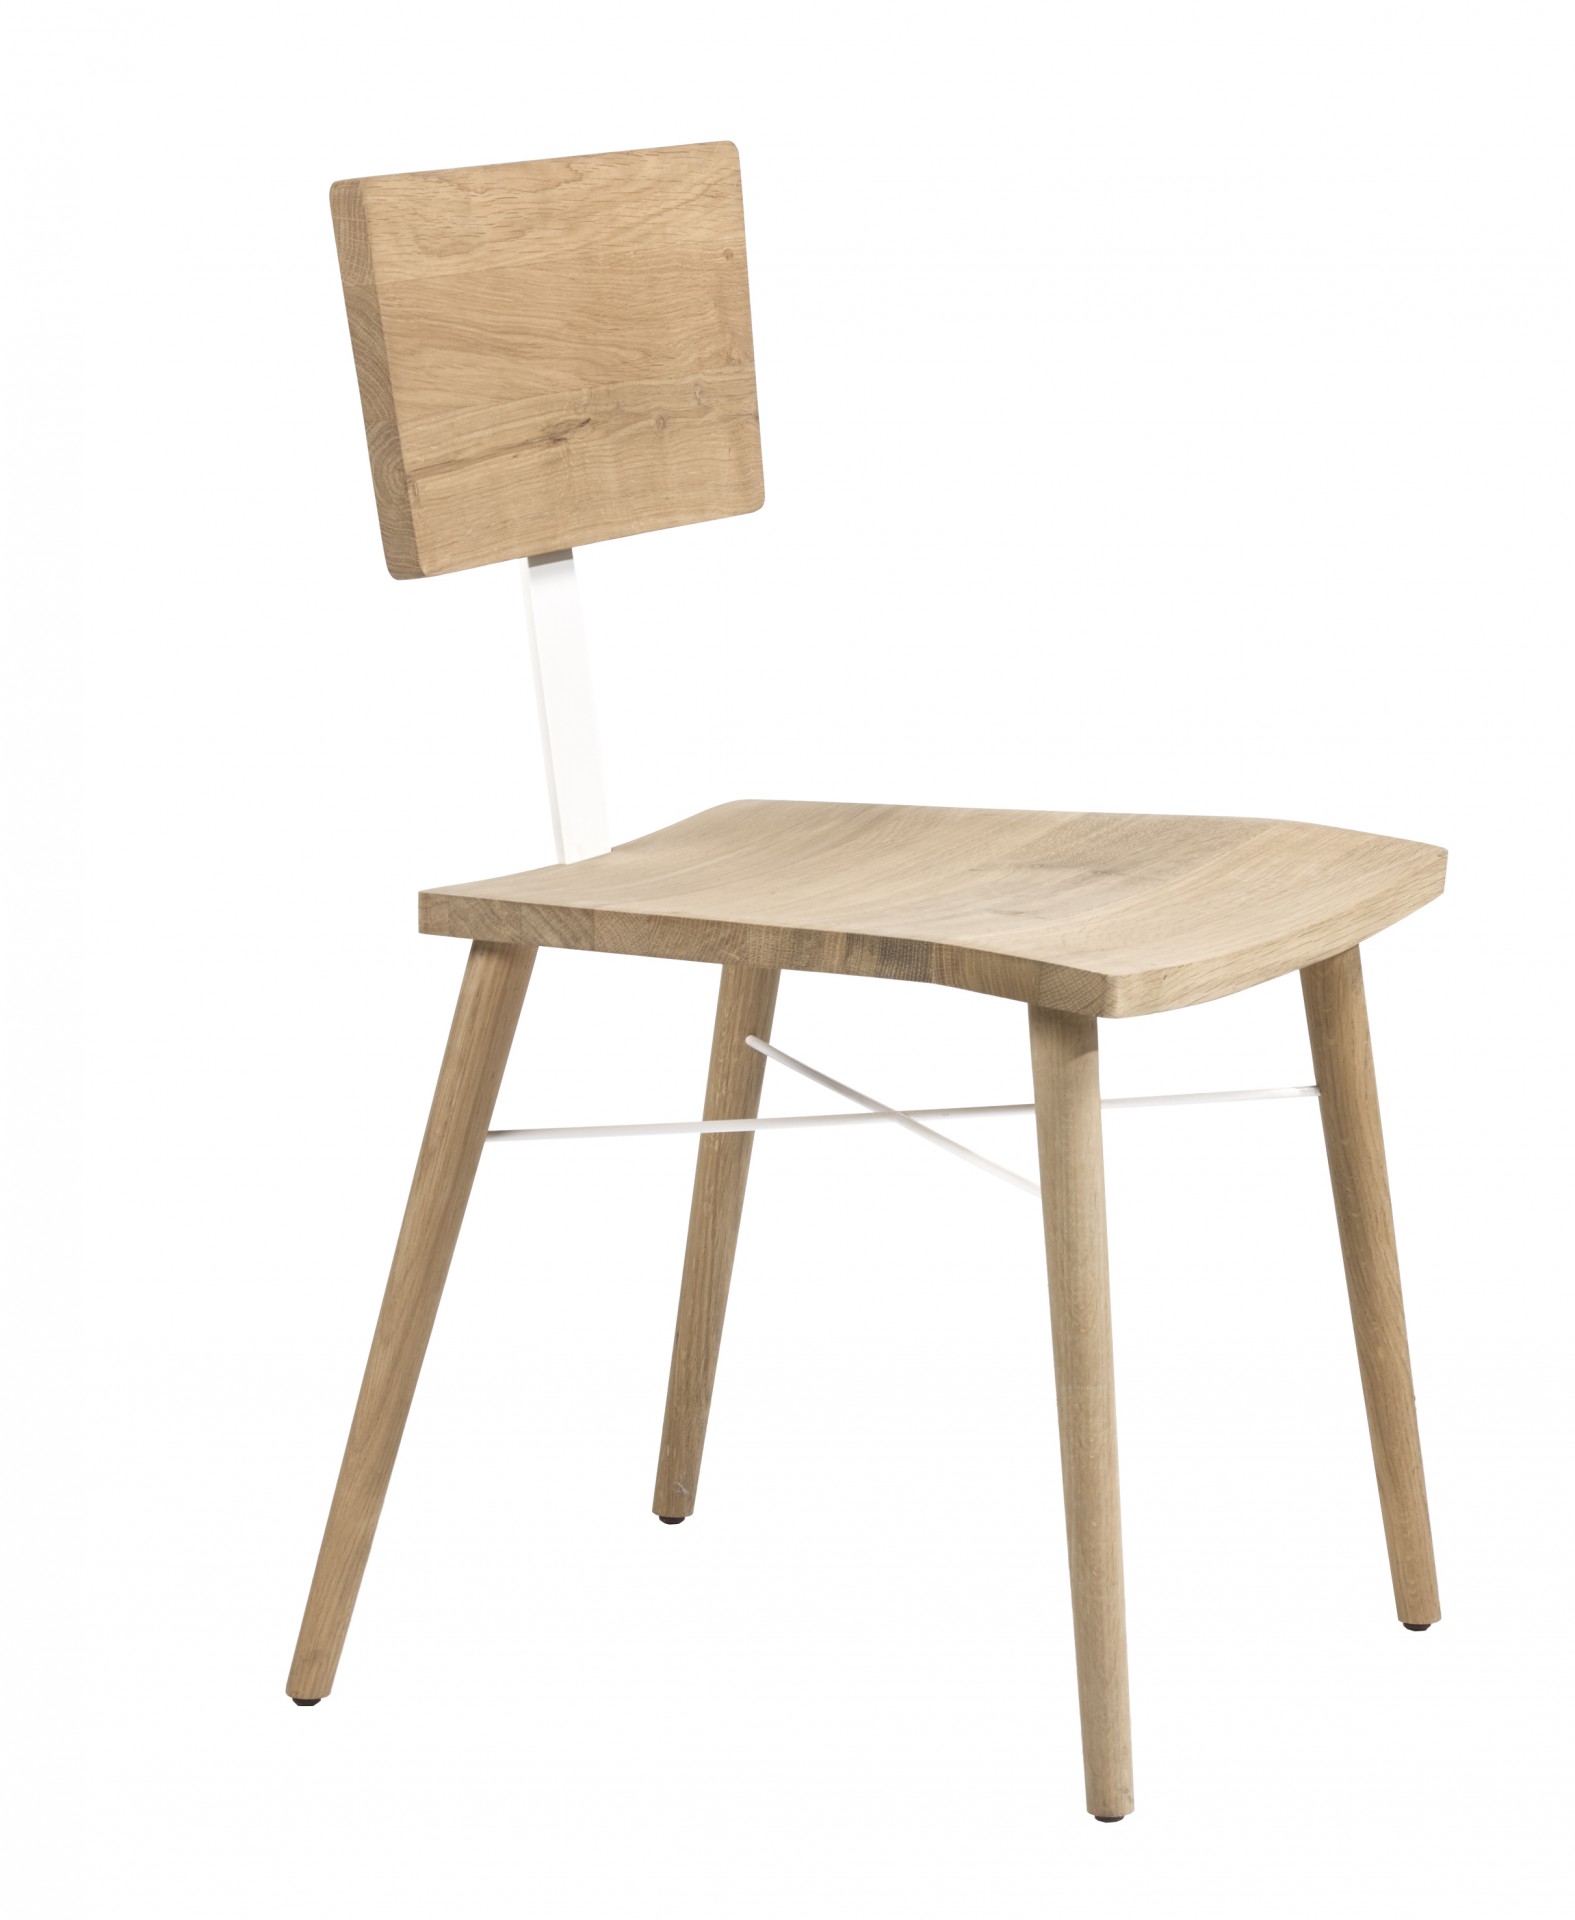 DOWEL Chair by Jonas Wahlström for Universo Positivo